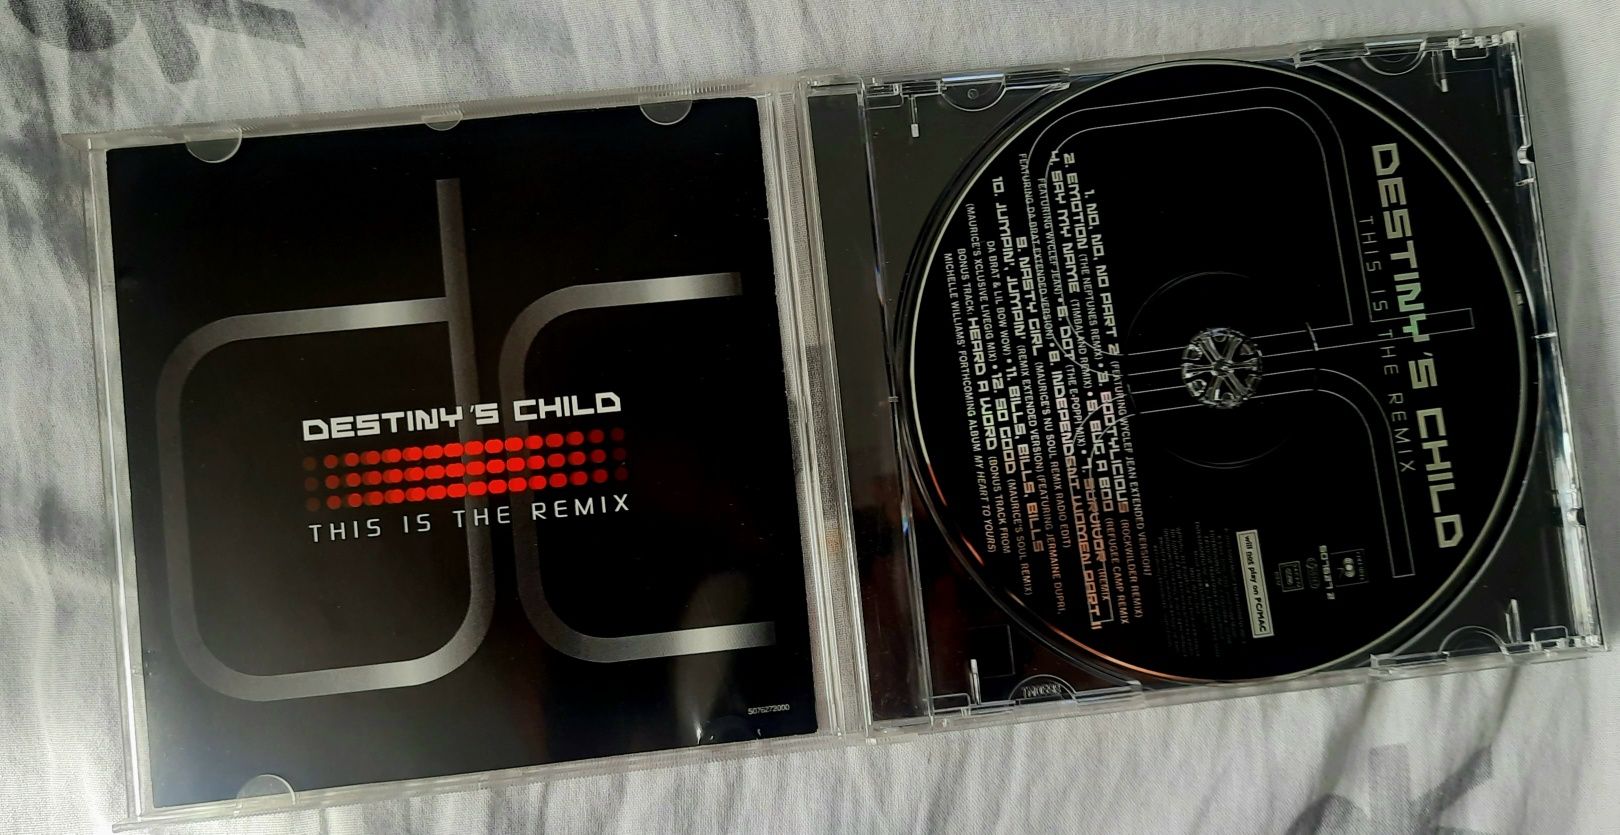 This Is The Remix by Destiny's Child cd 2002
This Is The Remix by Dest